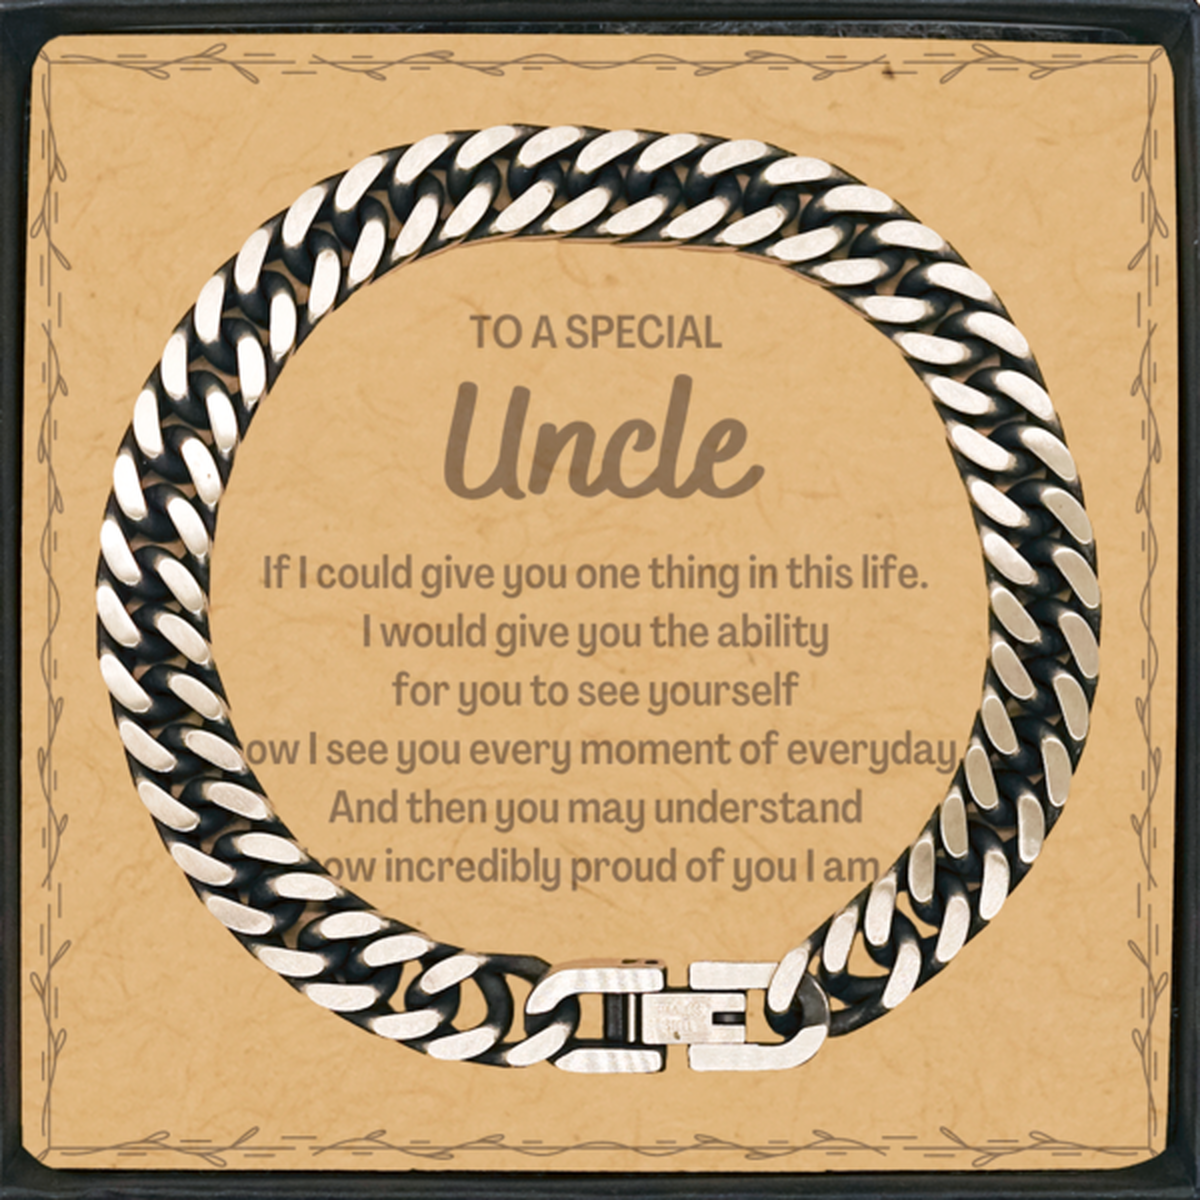 To My Uncle Cuban Link Chain Bracelet, Gifts For Uncle Message Card, Inspirational Gifts for Christmas Birthday, Epic Gifts for Uncle To A Special Uncle how incredibly proud of you I am